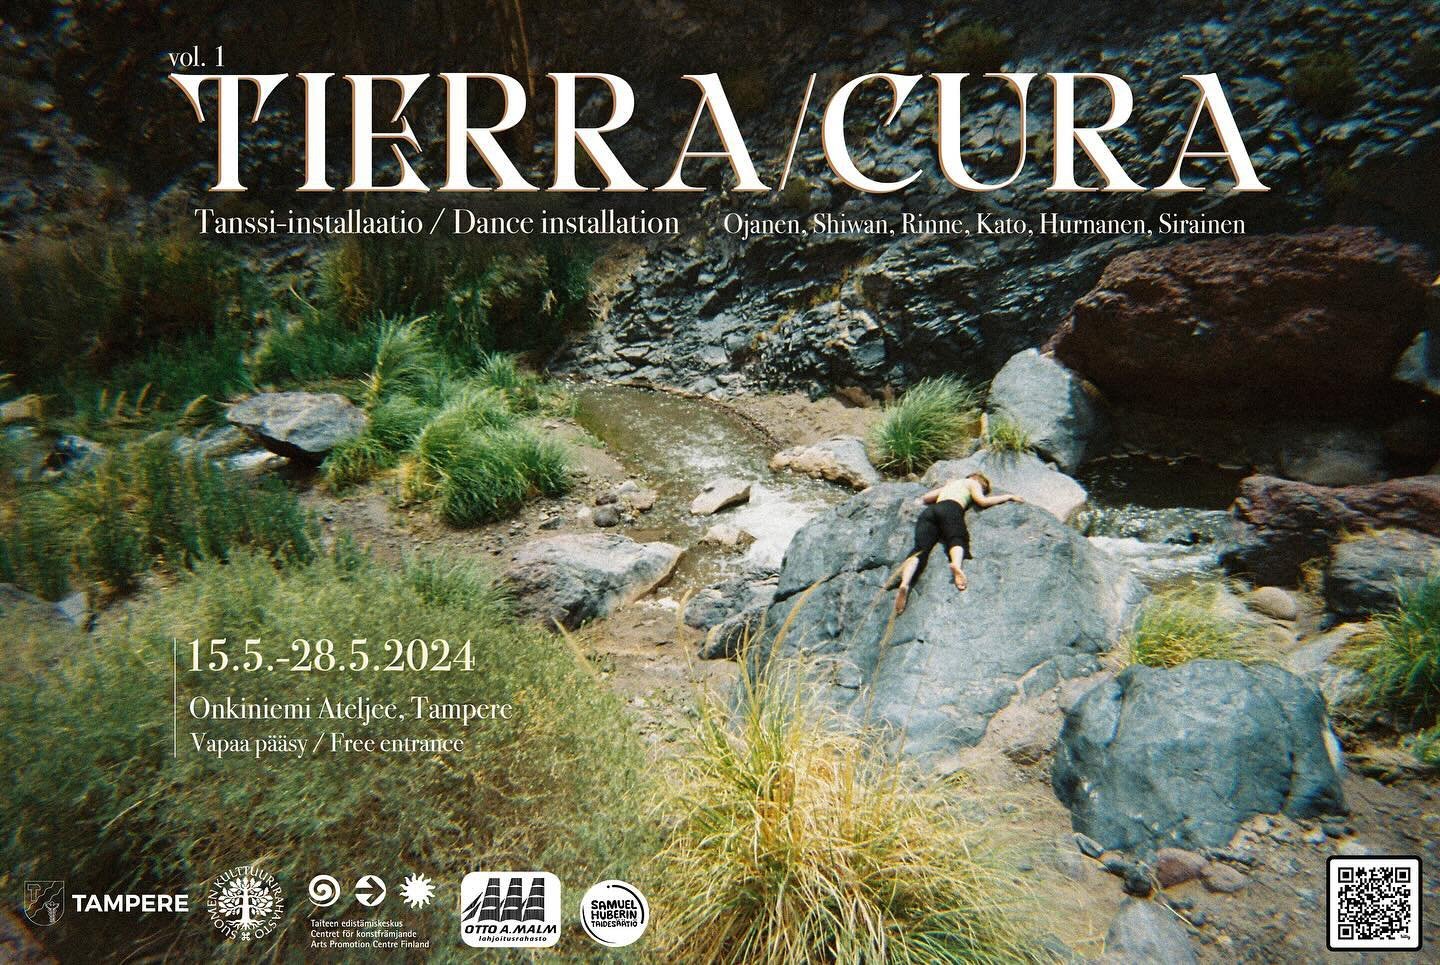 Welcome to the work-in-process exhibition of TIERRA/CURA (vol. I) from 15.5.-28.5.2024 at @onkiniemiateljee 💚 
TIERRA/CURA (eng. soil/care) is a dance installation about the body&rsquo;s relationship with soil and care. In the dance installation, va